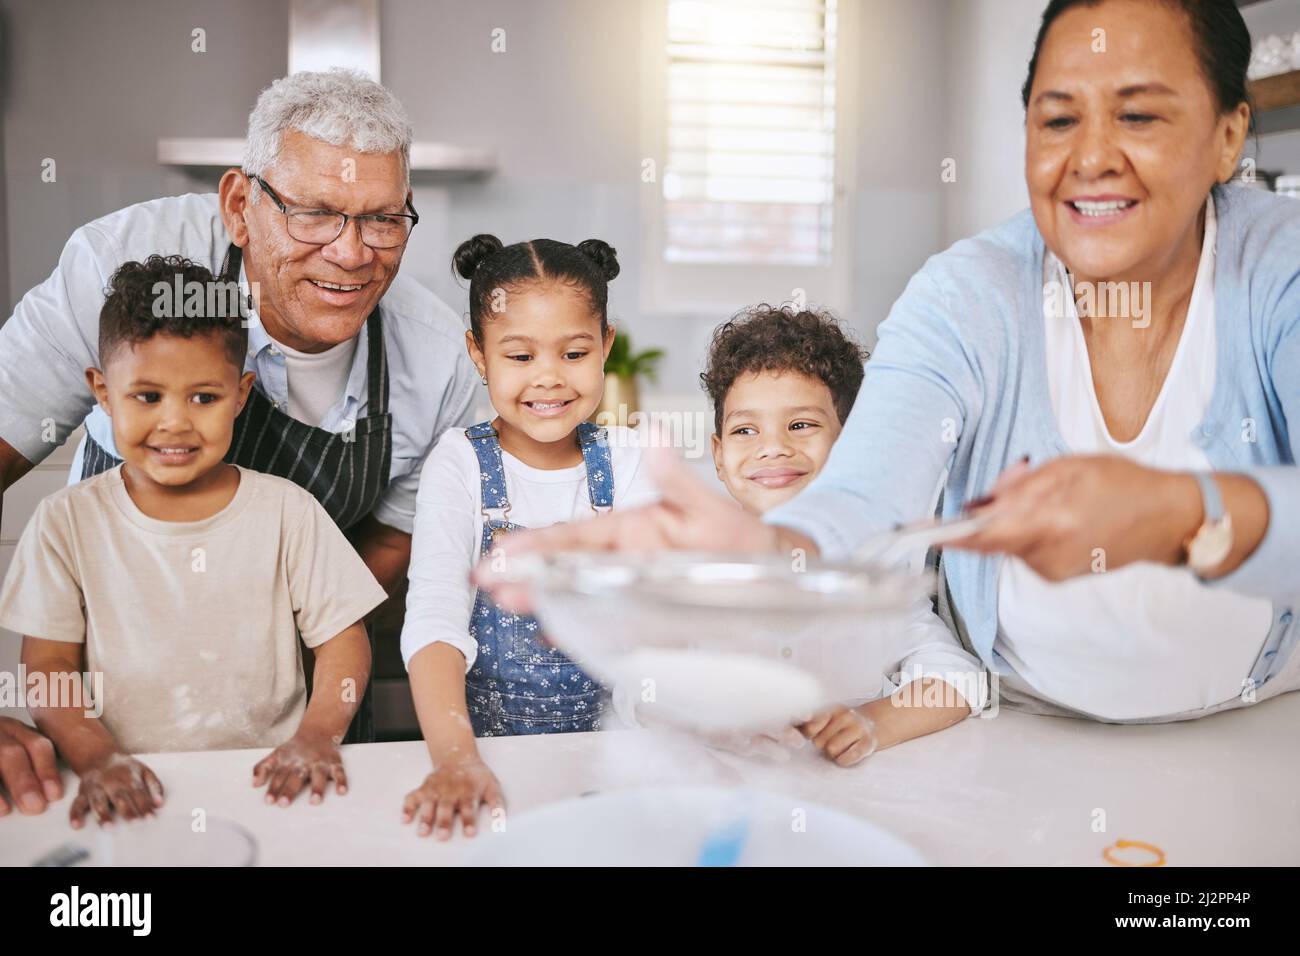 Learning family secrets. Shot of a mature couple baking with their grandkids at home. Stock Photo